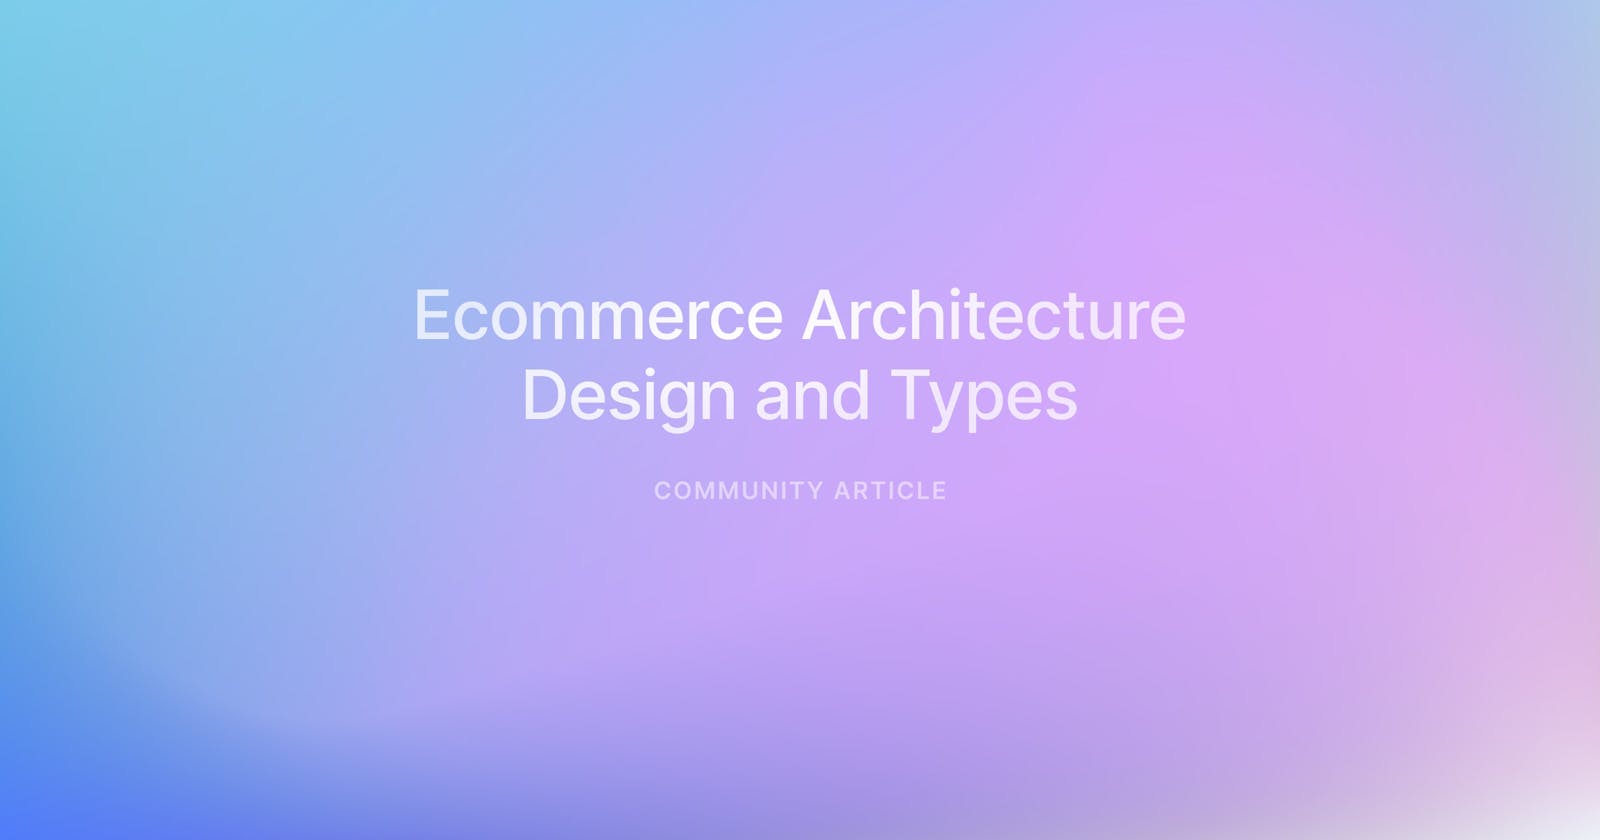 Explaining the Design and Types of Ecommerce Architecture